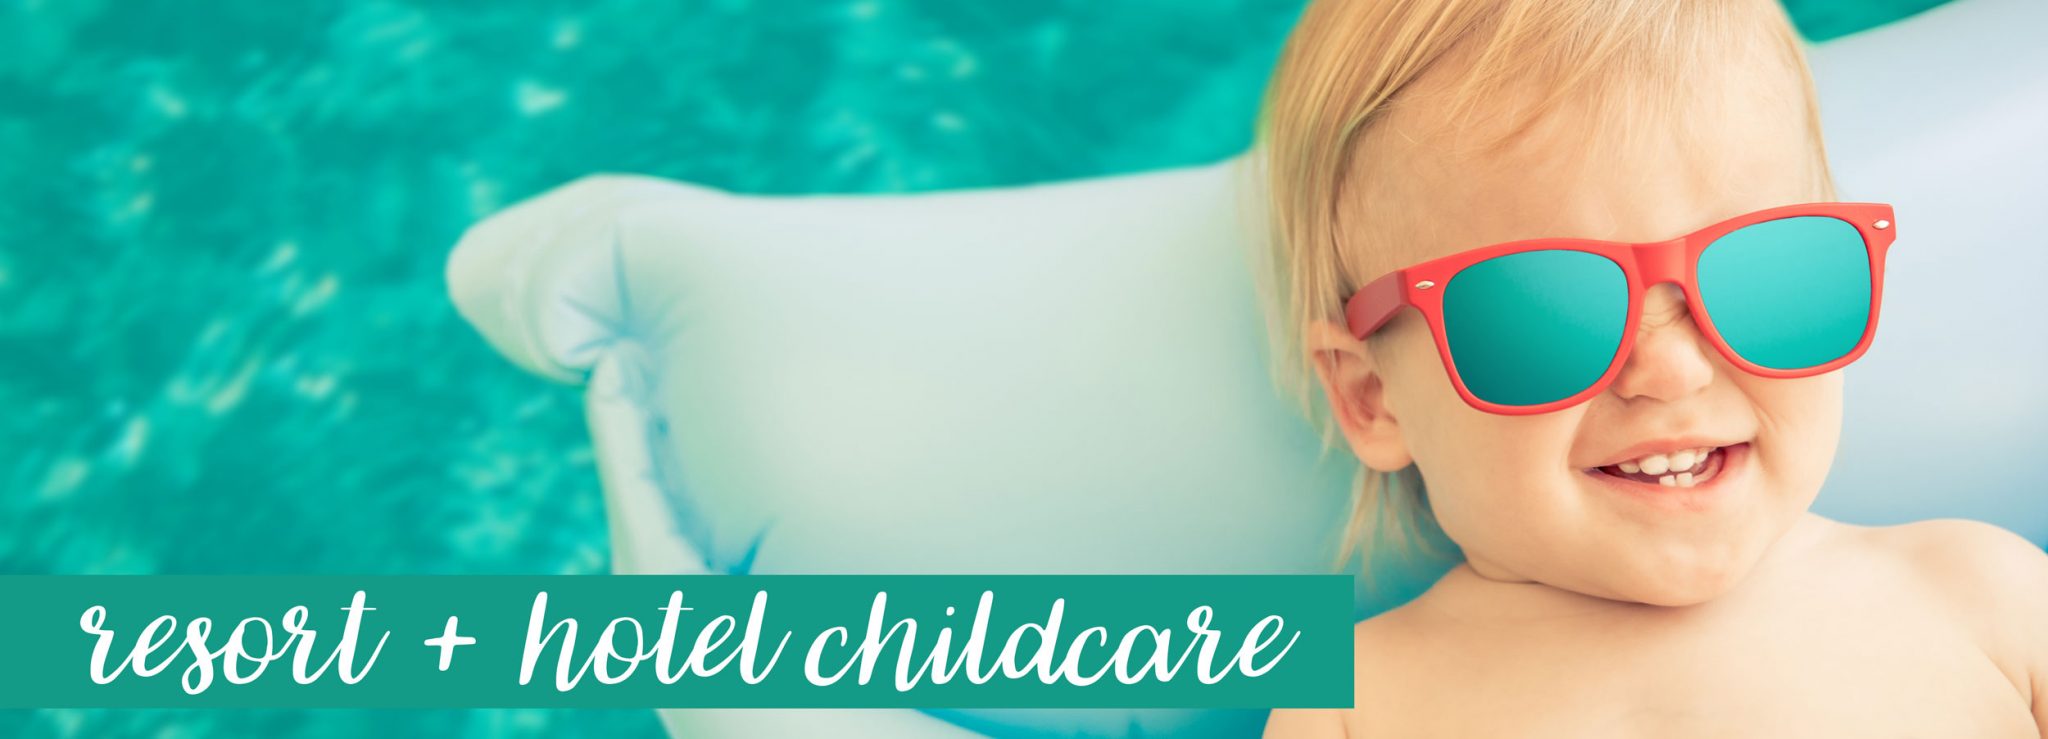 Resort and Hotel Childcare Service from Capitol Park Nannies, Sacramento-based Nanny Agency (teal banner)